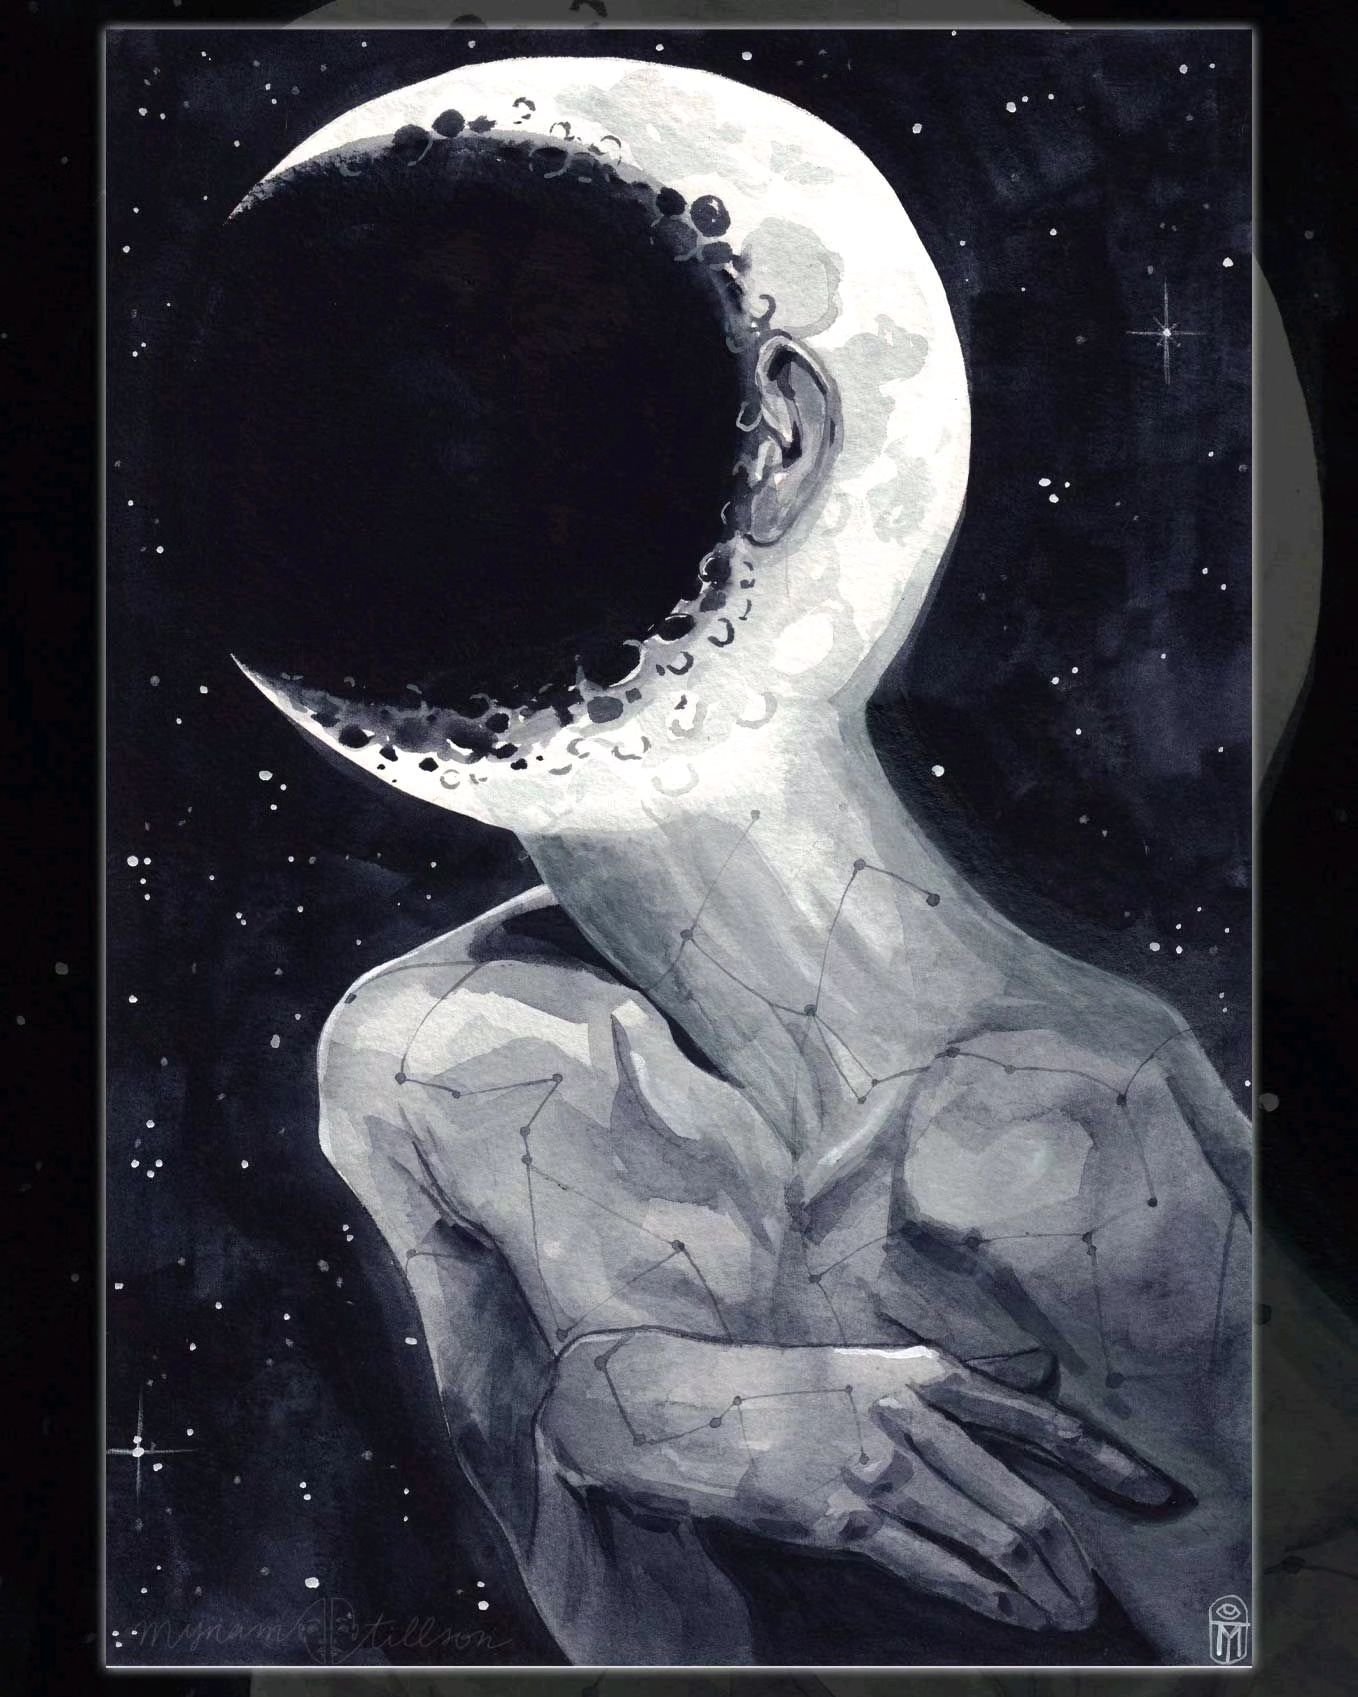 Swipe to see my preliminary sketches for WANNING 🌛 &gt;&gt;&gt;
I'm not sure how obvious it ever was, but I did a little play on words with the title of this piece.
It most obviously refers to the phases of the moon, but the correct spelling of that